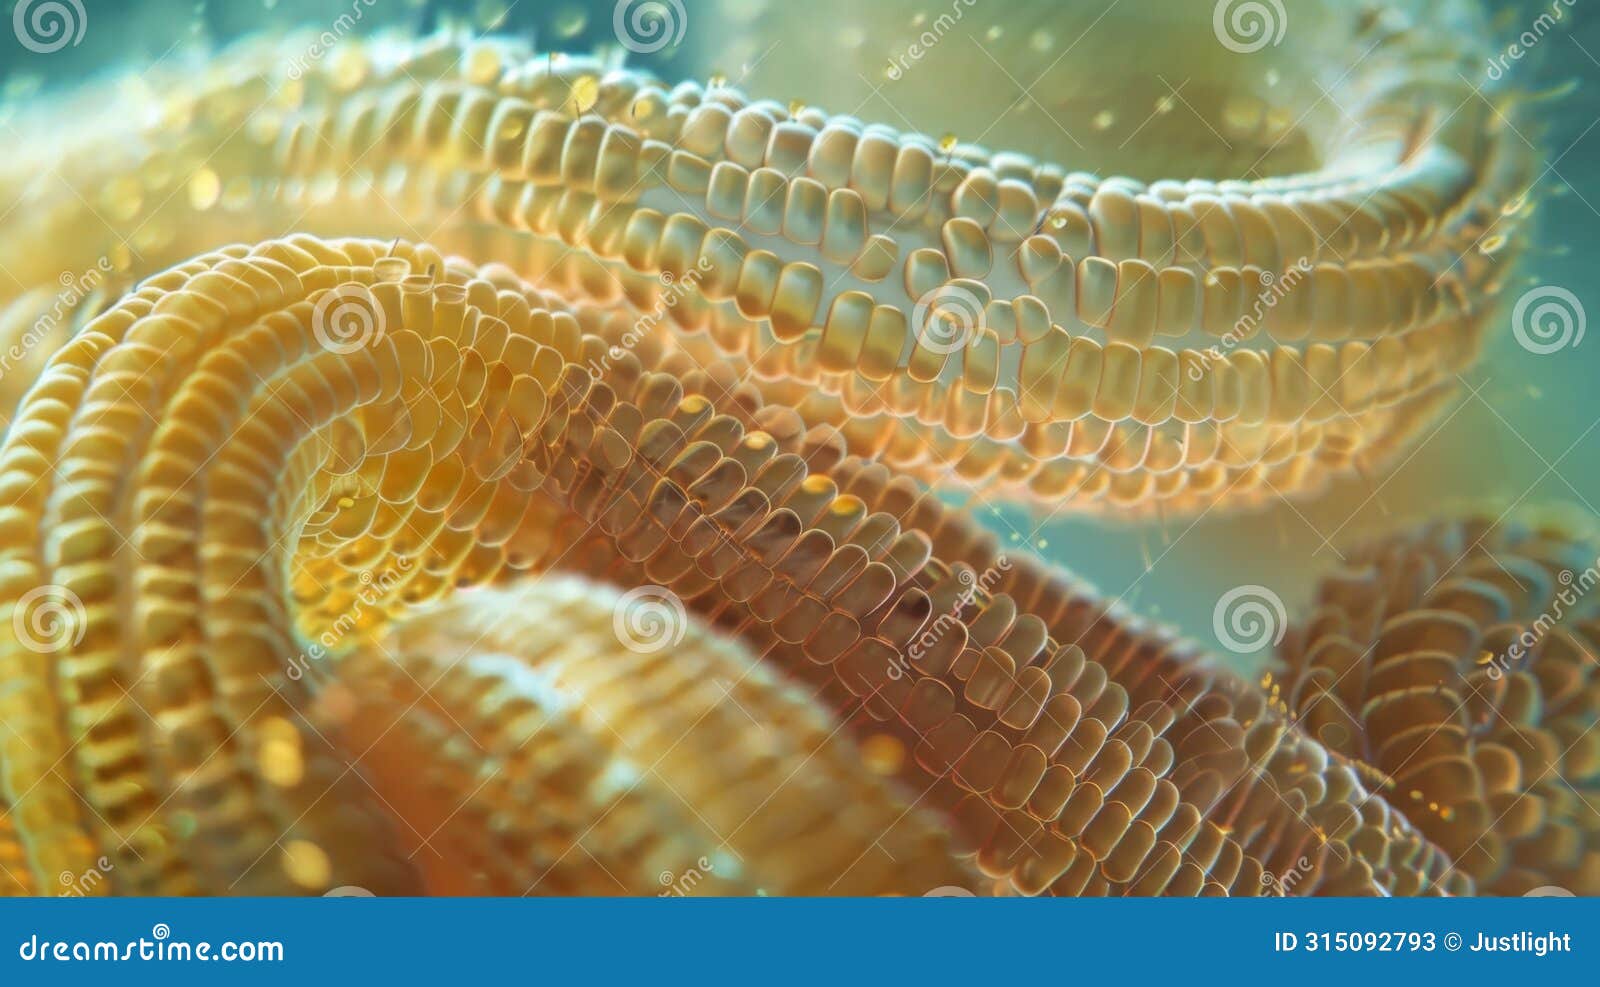 a closeup view of a tapeworm with its extensive network of segments visible under a microscope. the thin wormlike body